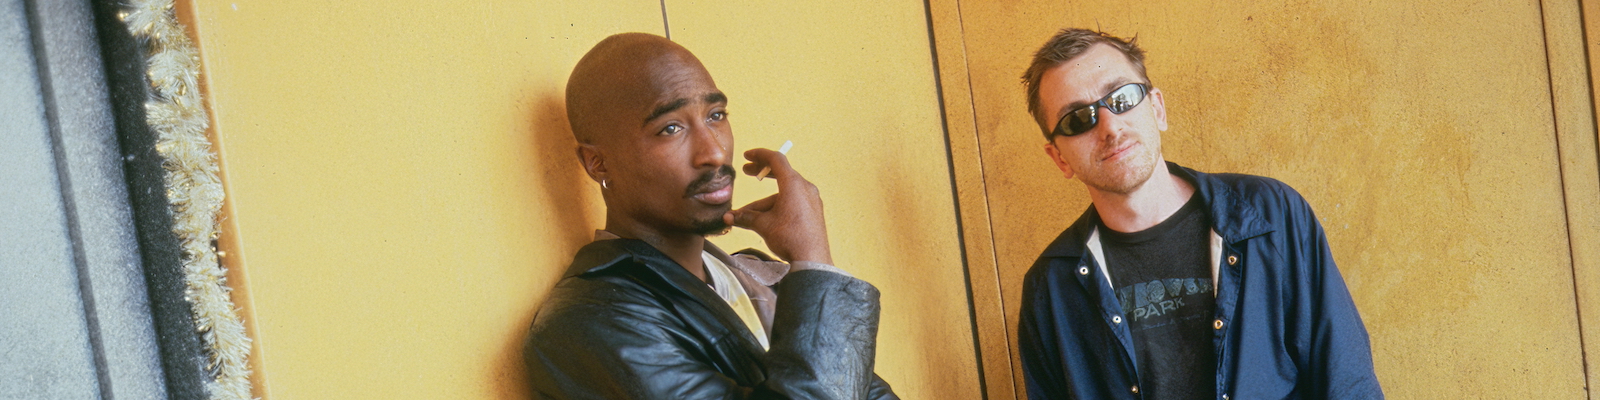 A smoking Tupac Shakur and Tim Roth in sunglasses lean against a yellow wall in an image from the film Gridlock'd